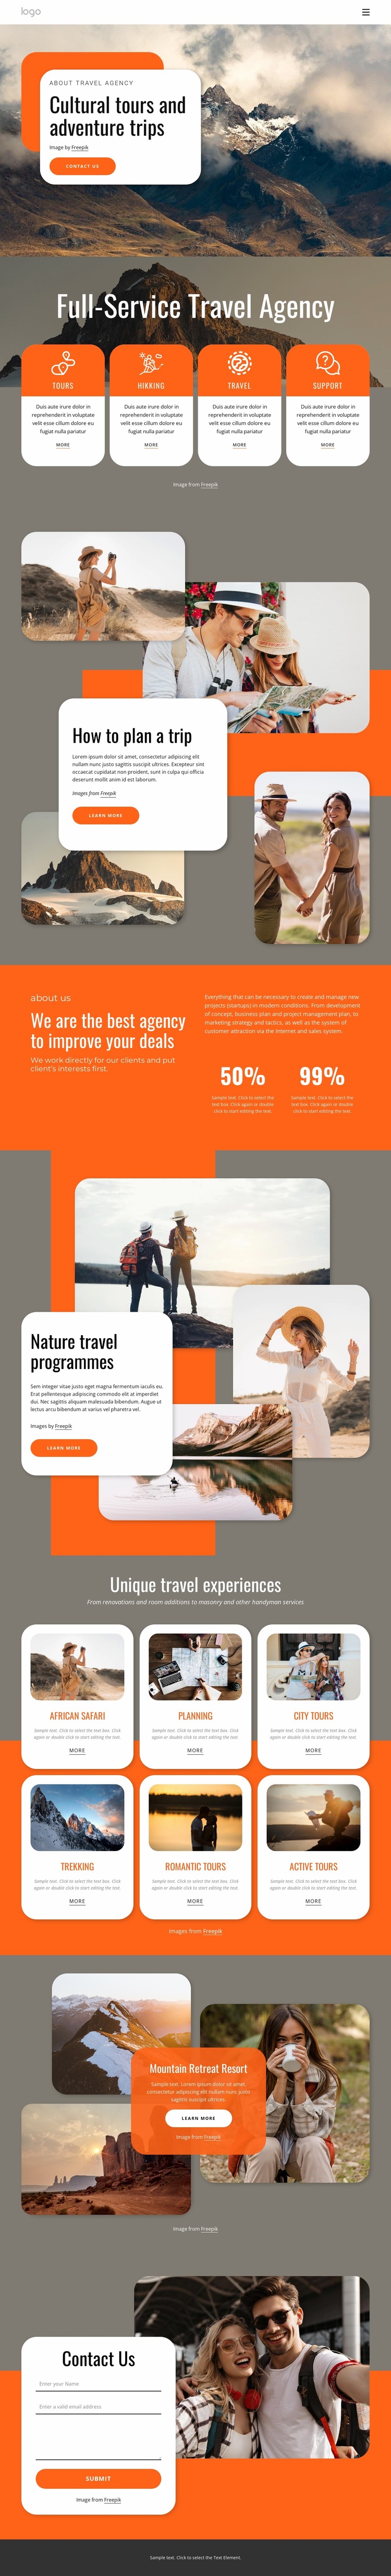 Group travel for all ages Website Builder Templates